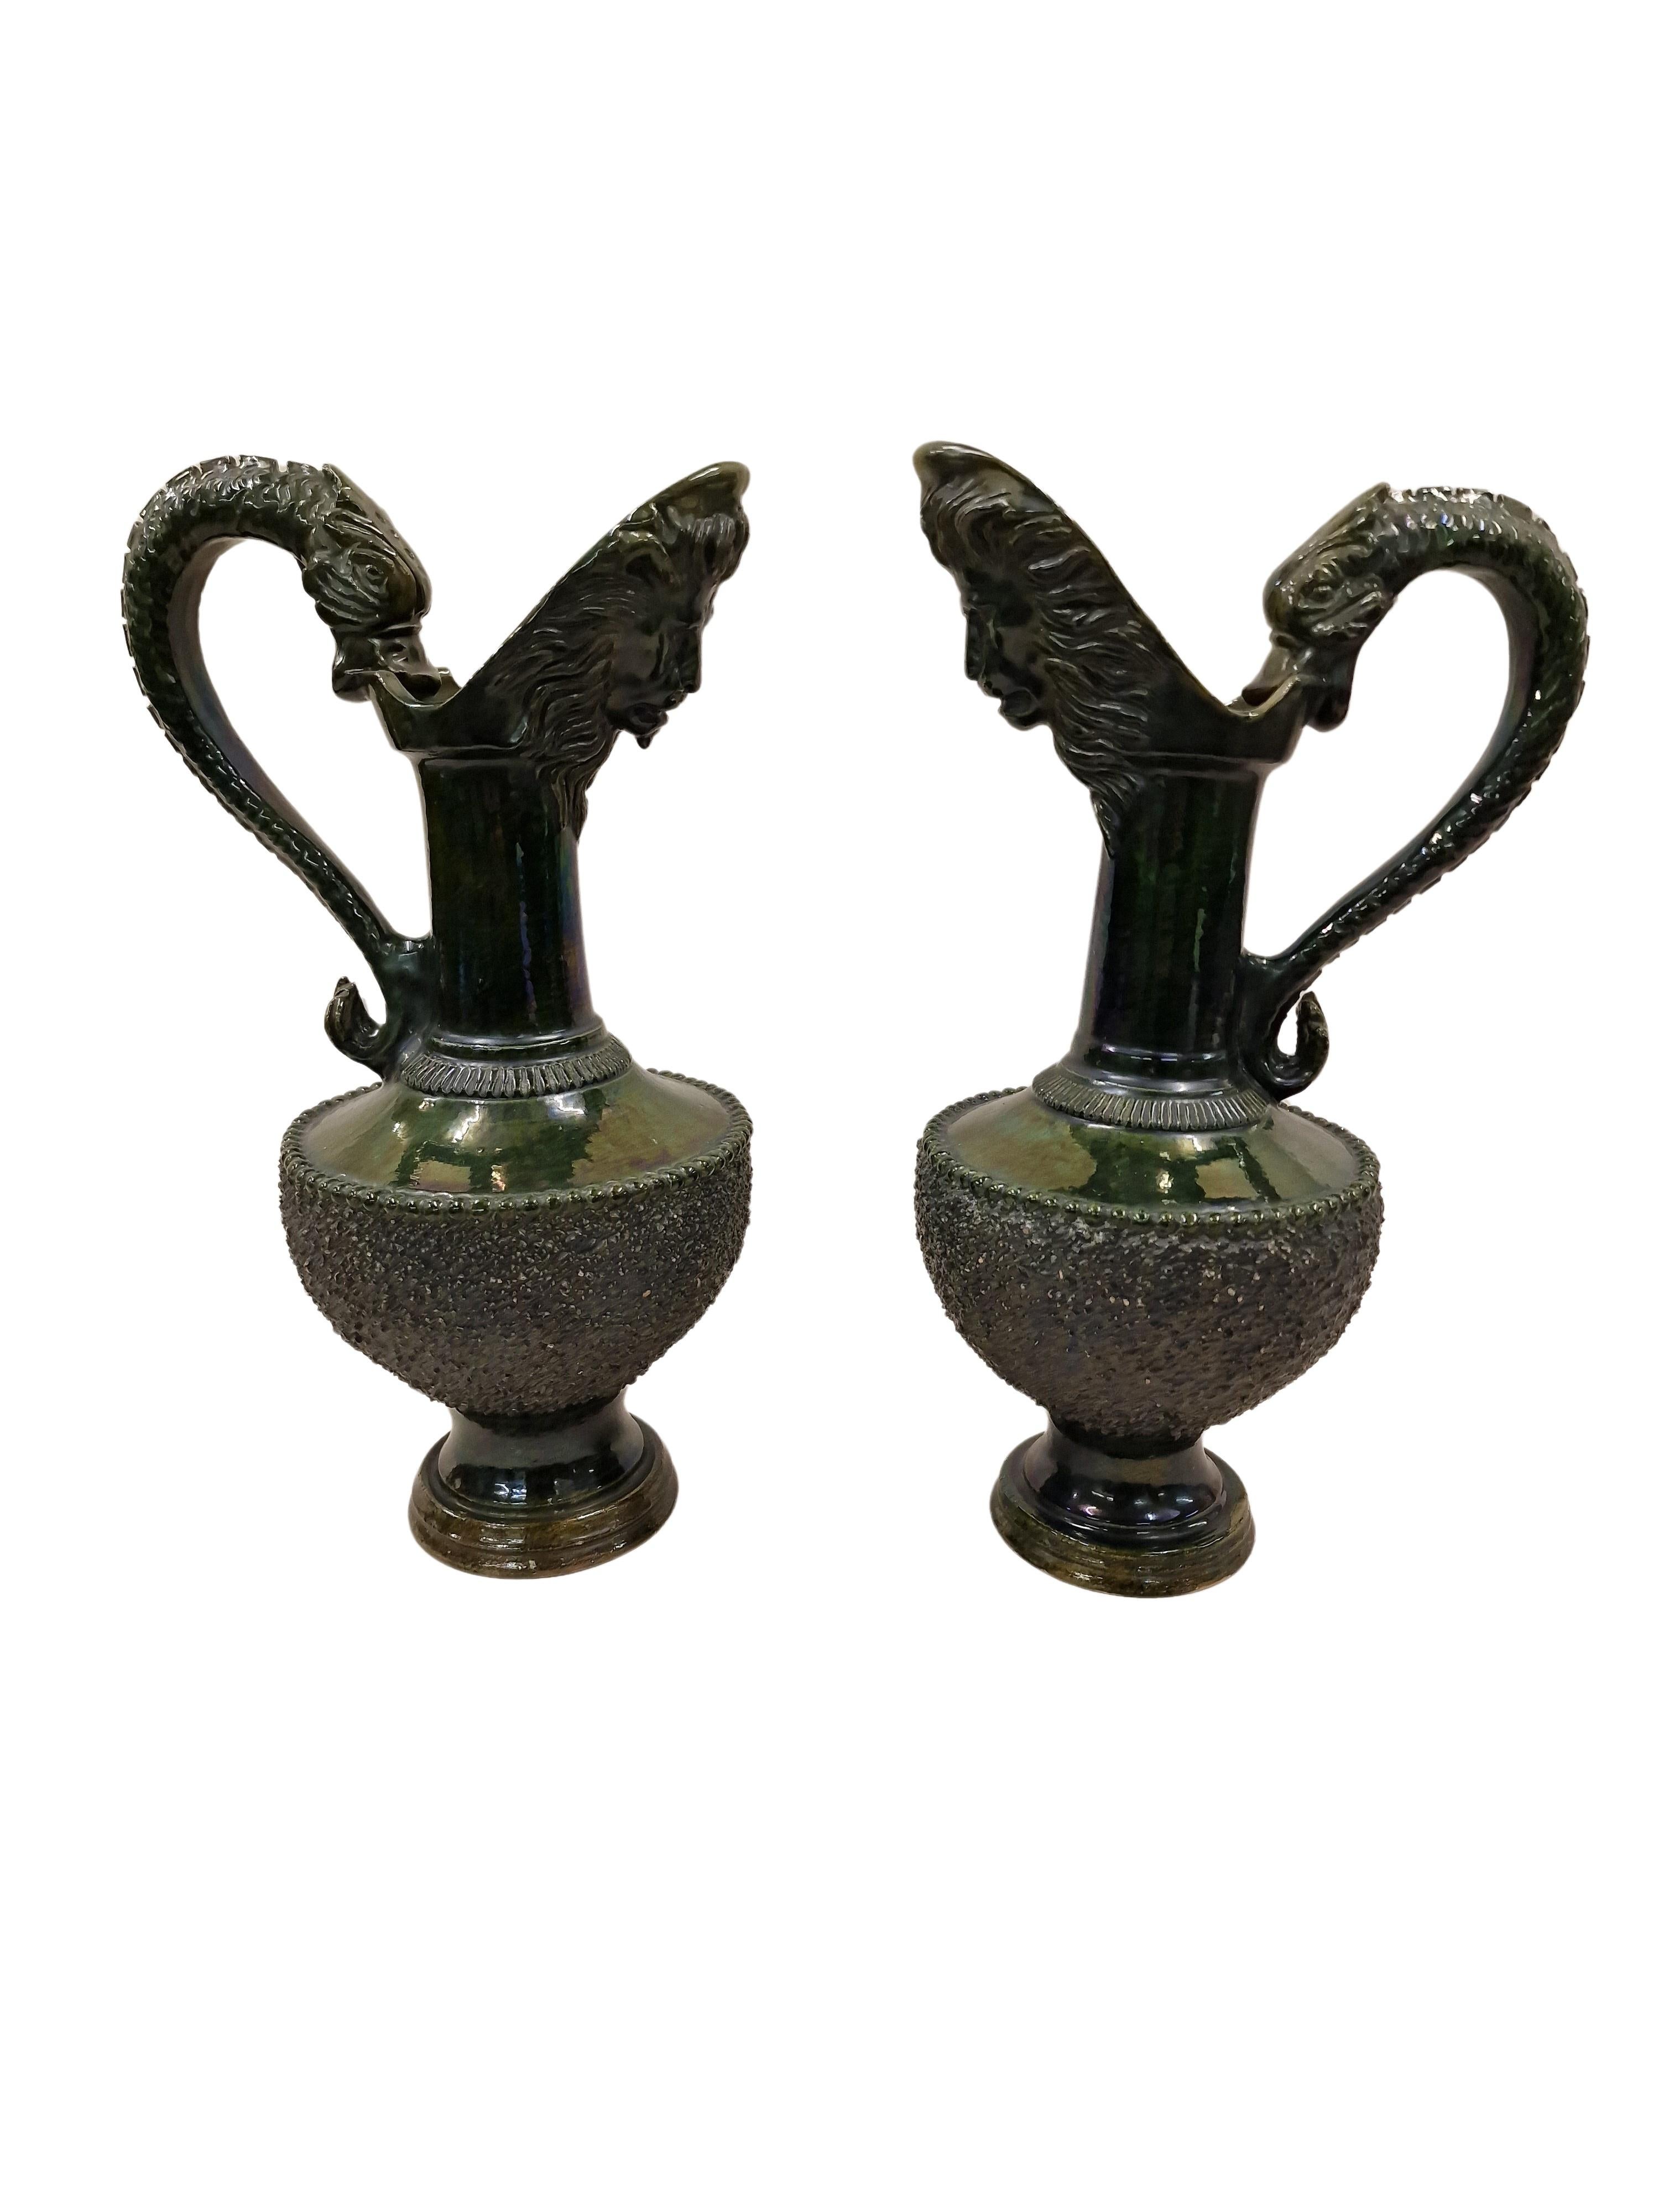 Set of a swivel jug set, in highly elaborate quality, made around 1880 in England.

The jugs have a round base which opens into a very bulbous body which then flows into a very upturned neck and an outlet with a lion's face. The handles are also